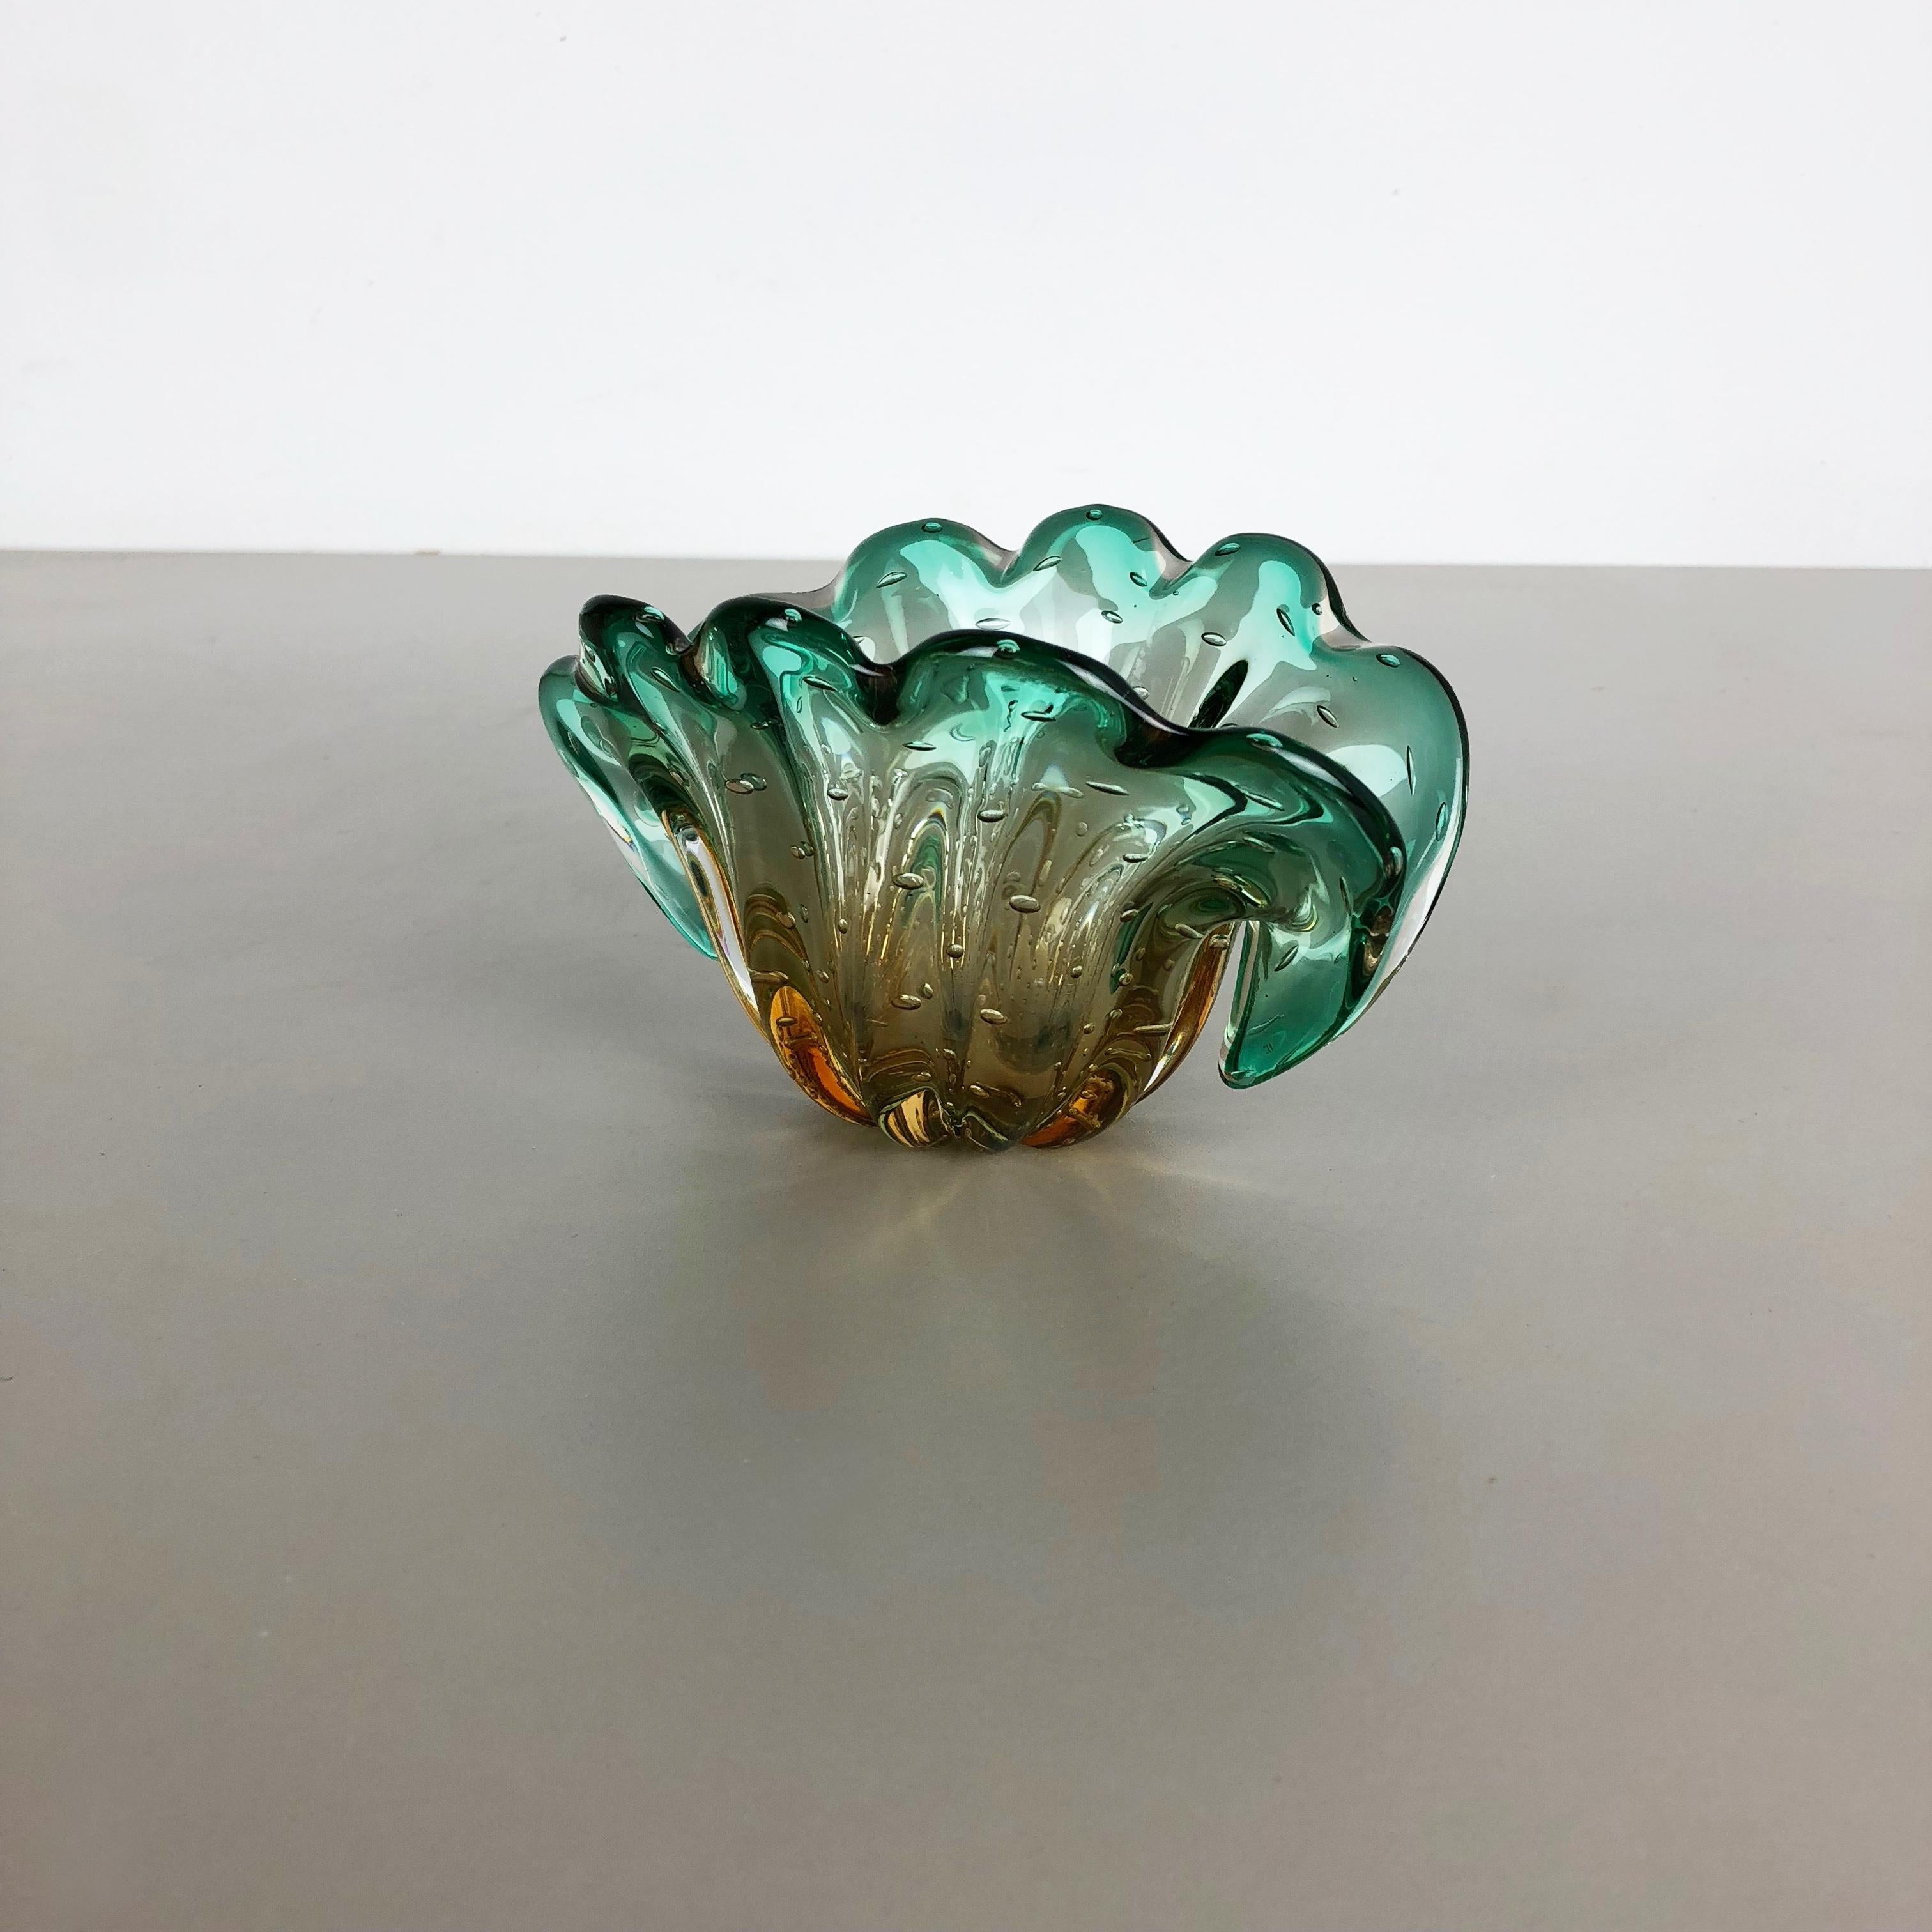 Article:

Murano glass shell element

Origin:

Murano, Italy

Decade:

1970s

An elegant green brown Murano glass bowl utilizing the bullicante technique of controlled bubbles within the glass. The element combine the color of green on